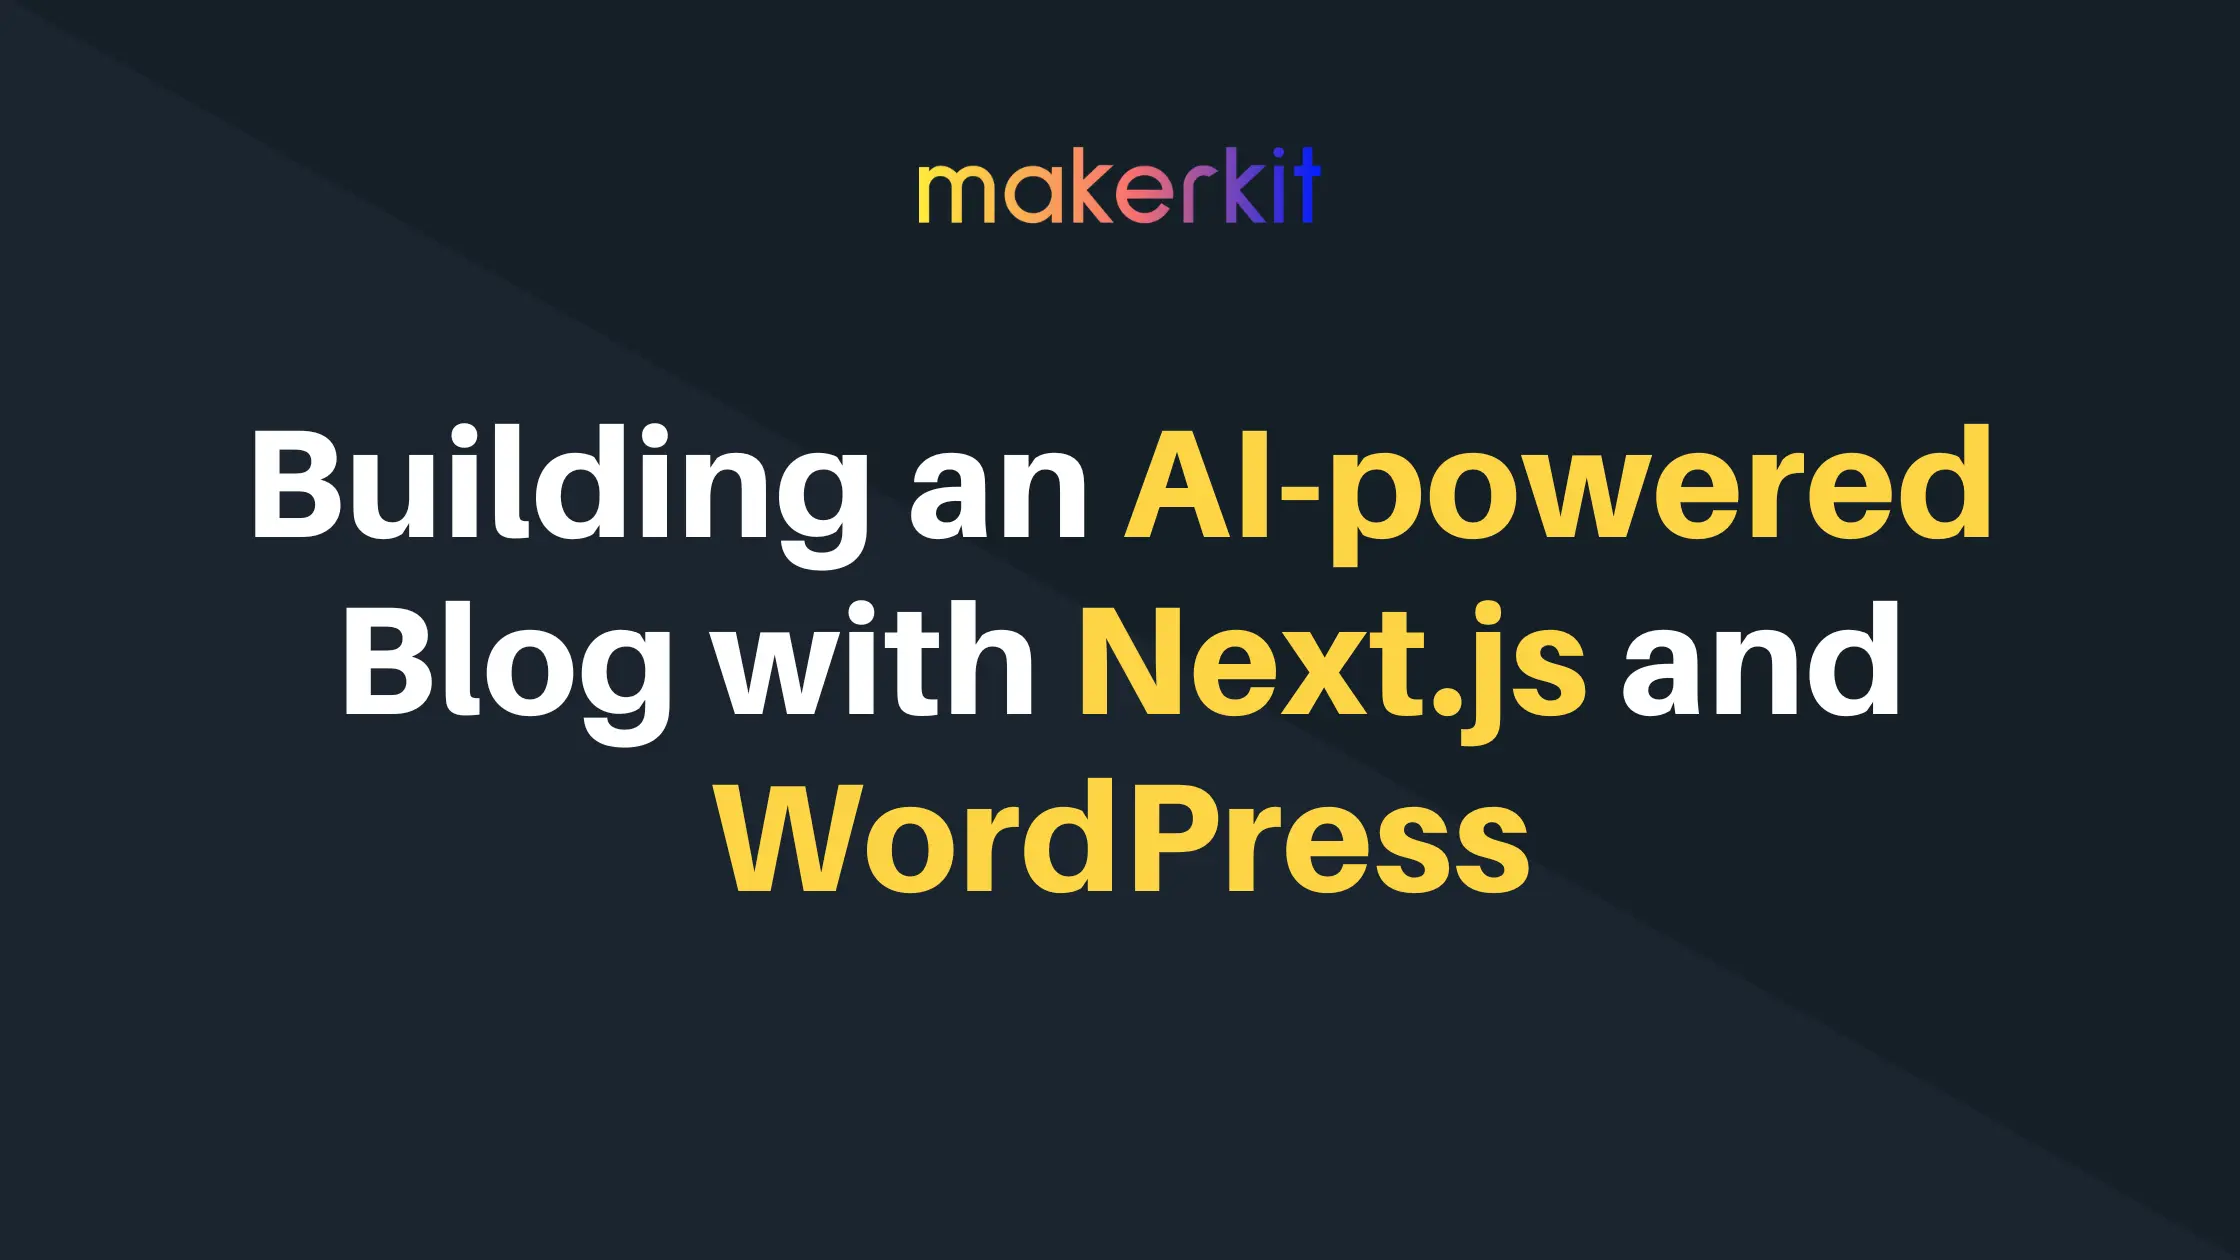 Cover Image for Building an AI-powered Blog with Next.js and WordPress